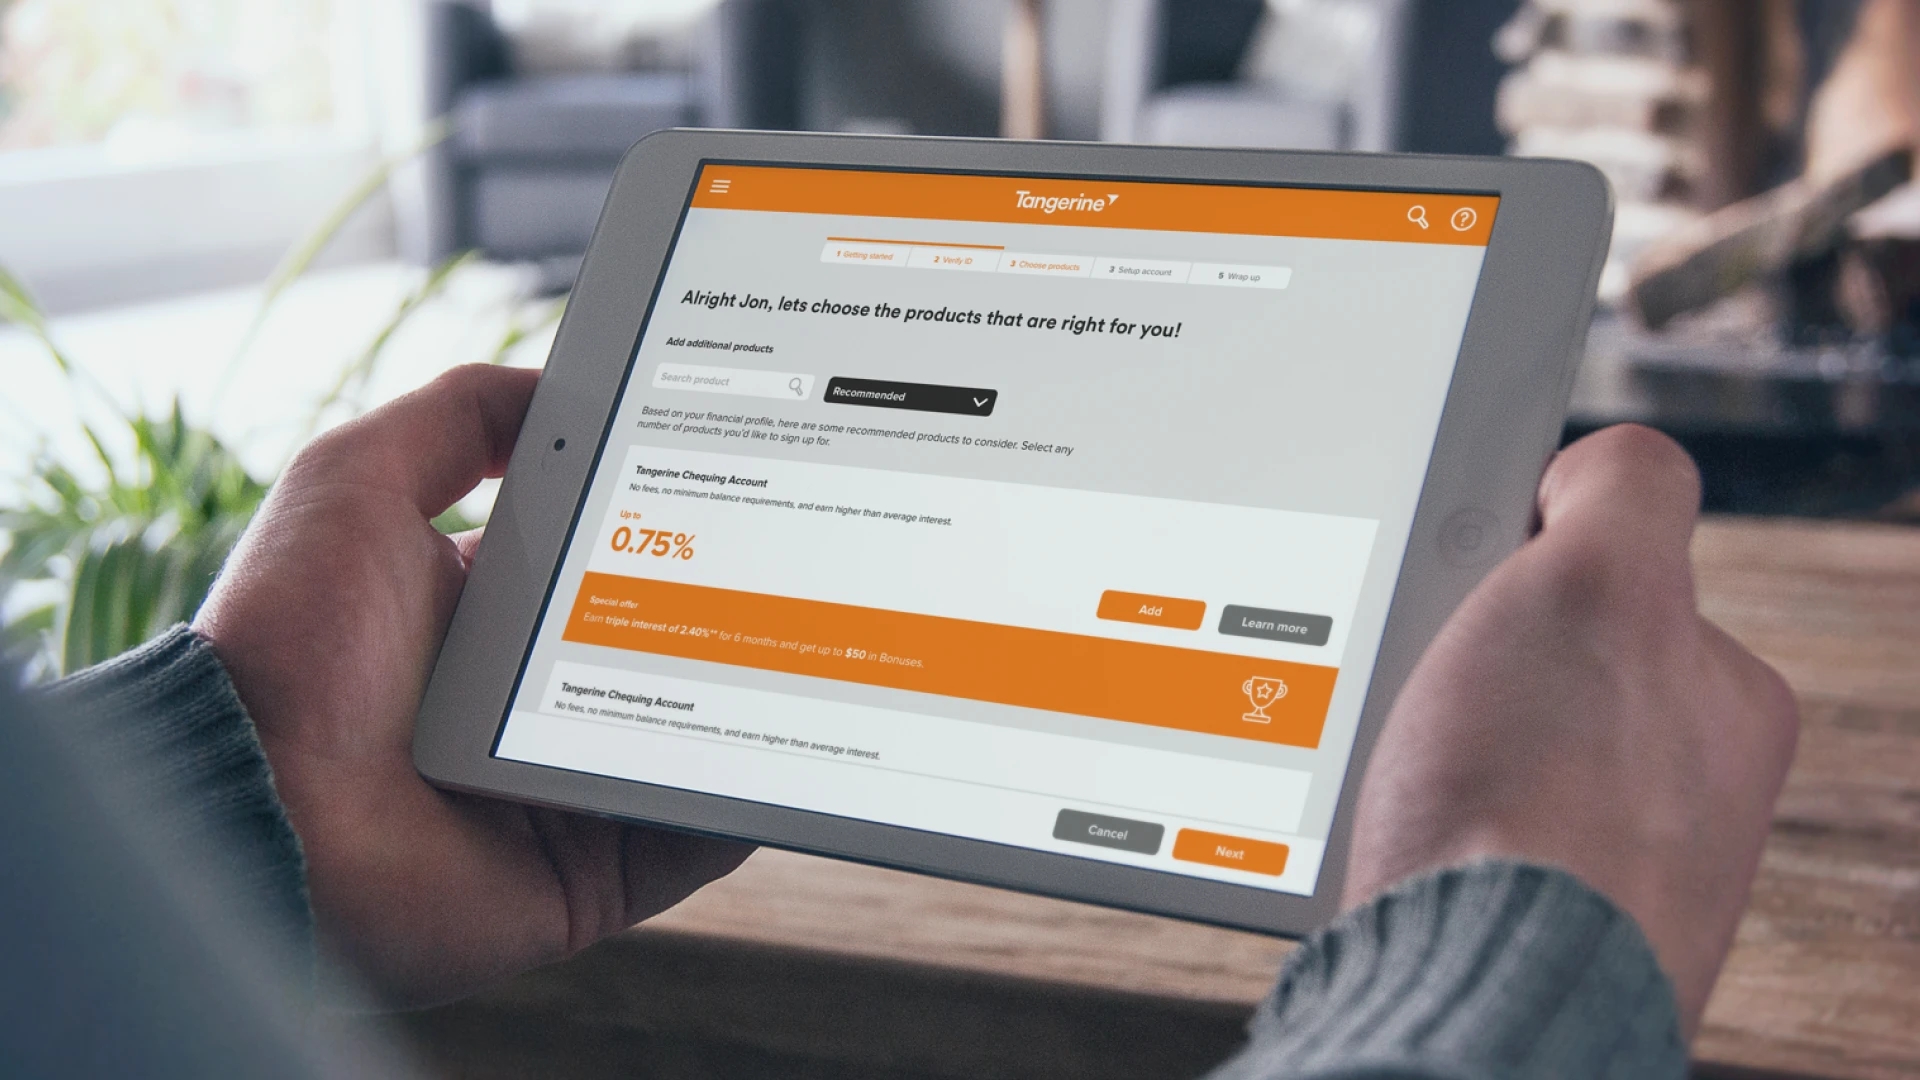 composite image of a user holding an ipad running the tangerine sign-up app in a tangerine cafe